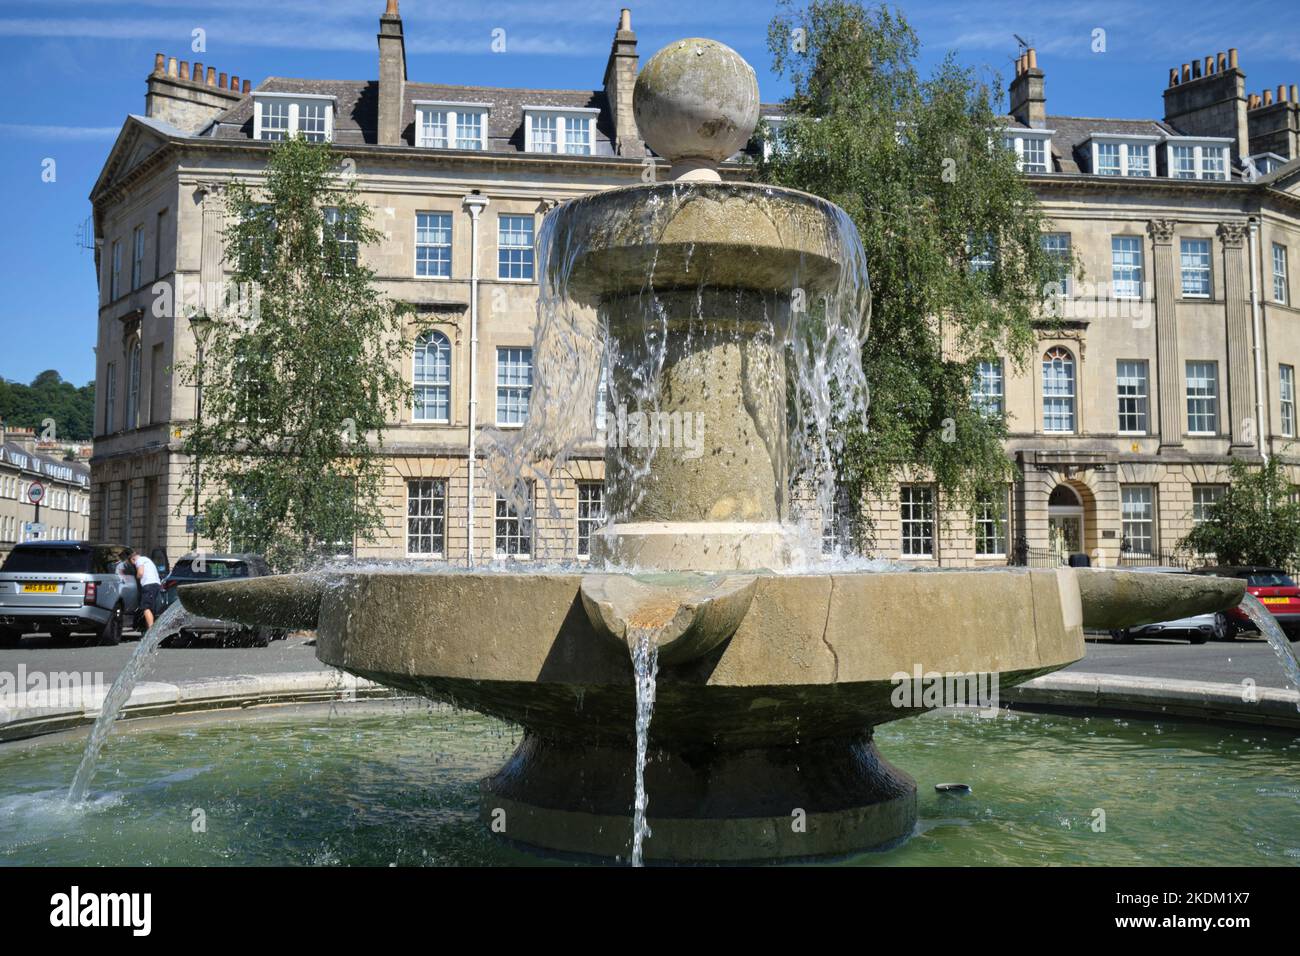 Historical Landmark Fountain at Laura Place in the Georgian city of Bath Somerset England UK Stock Photo